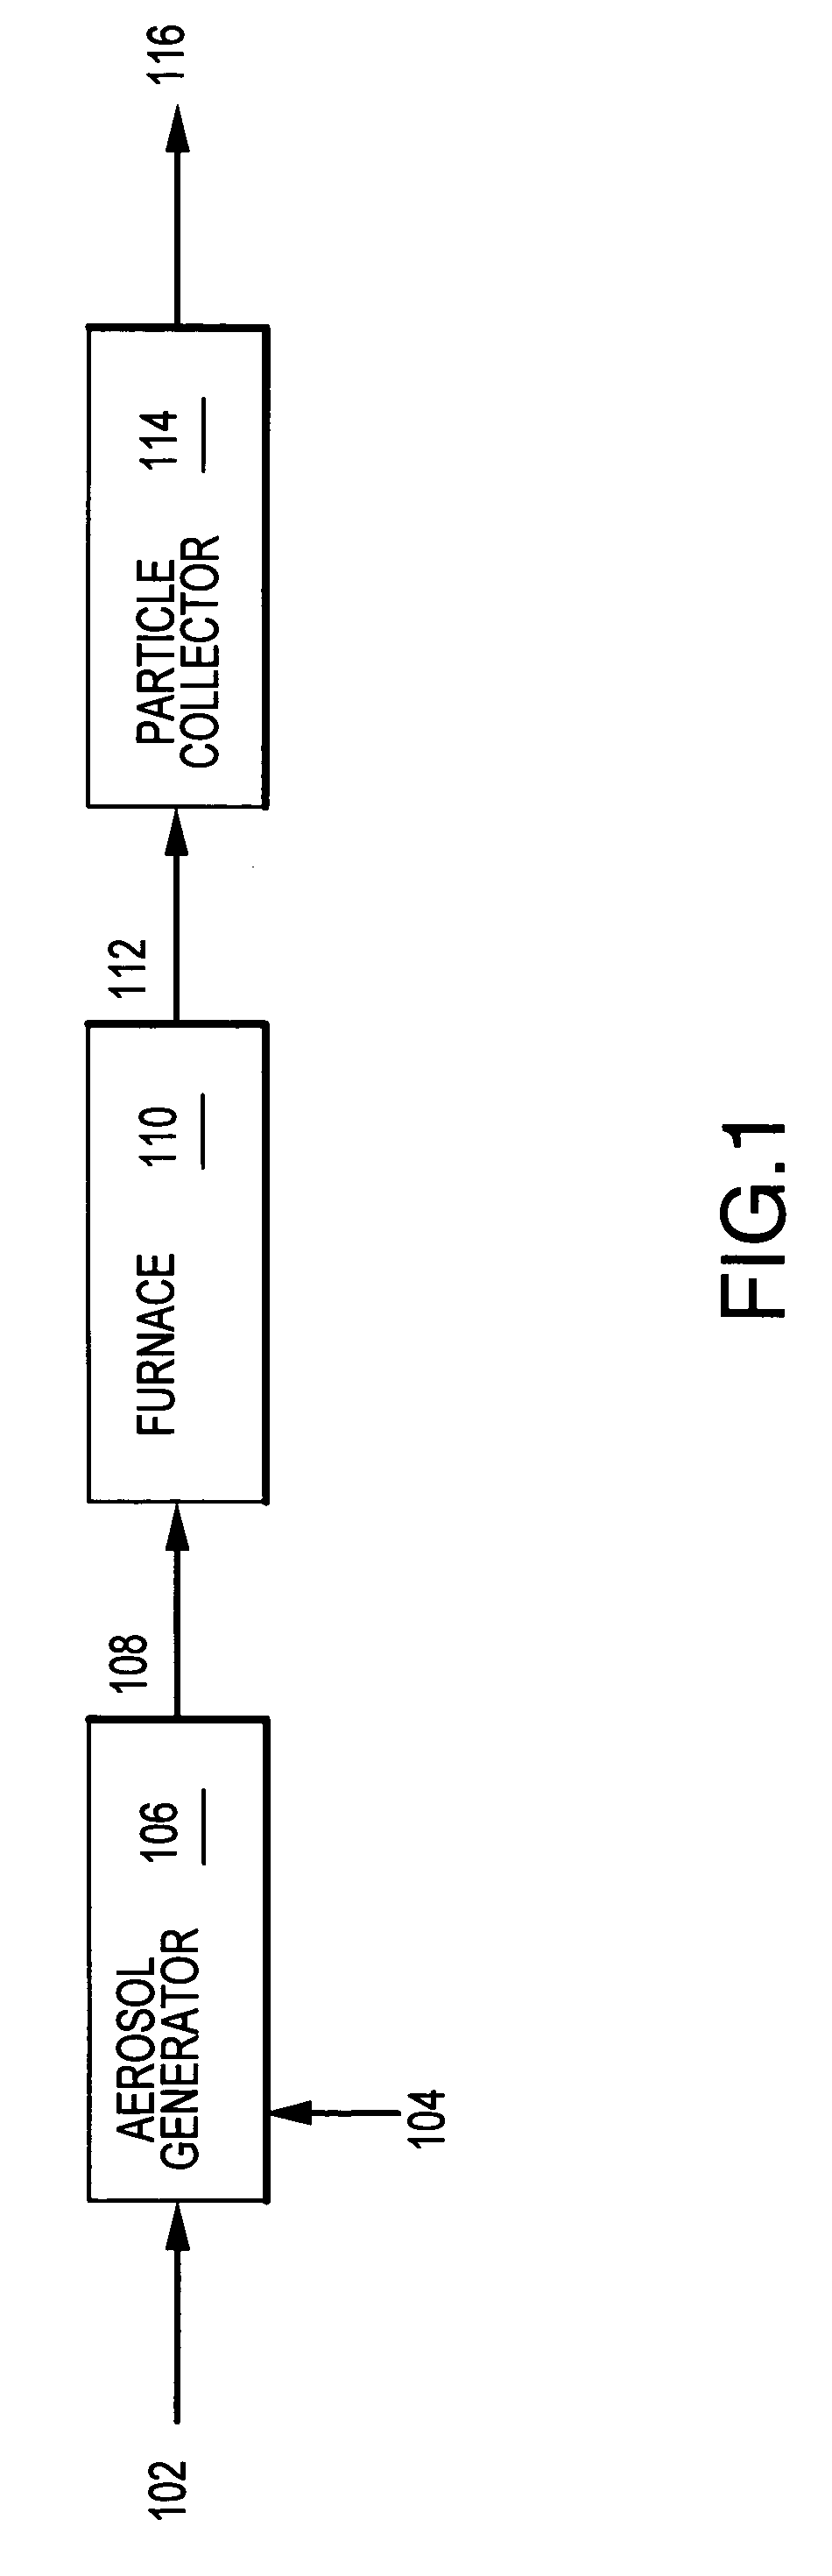 Electroluminescent phosphor powders, methods for making phosphor powders, and devices incorporating same